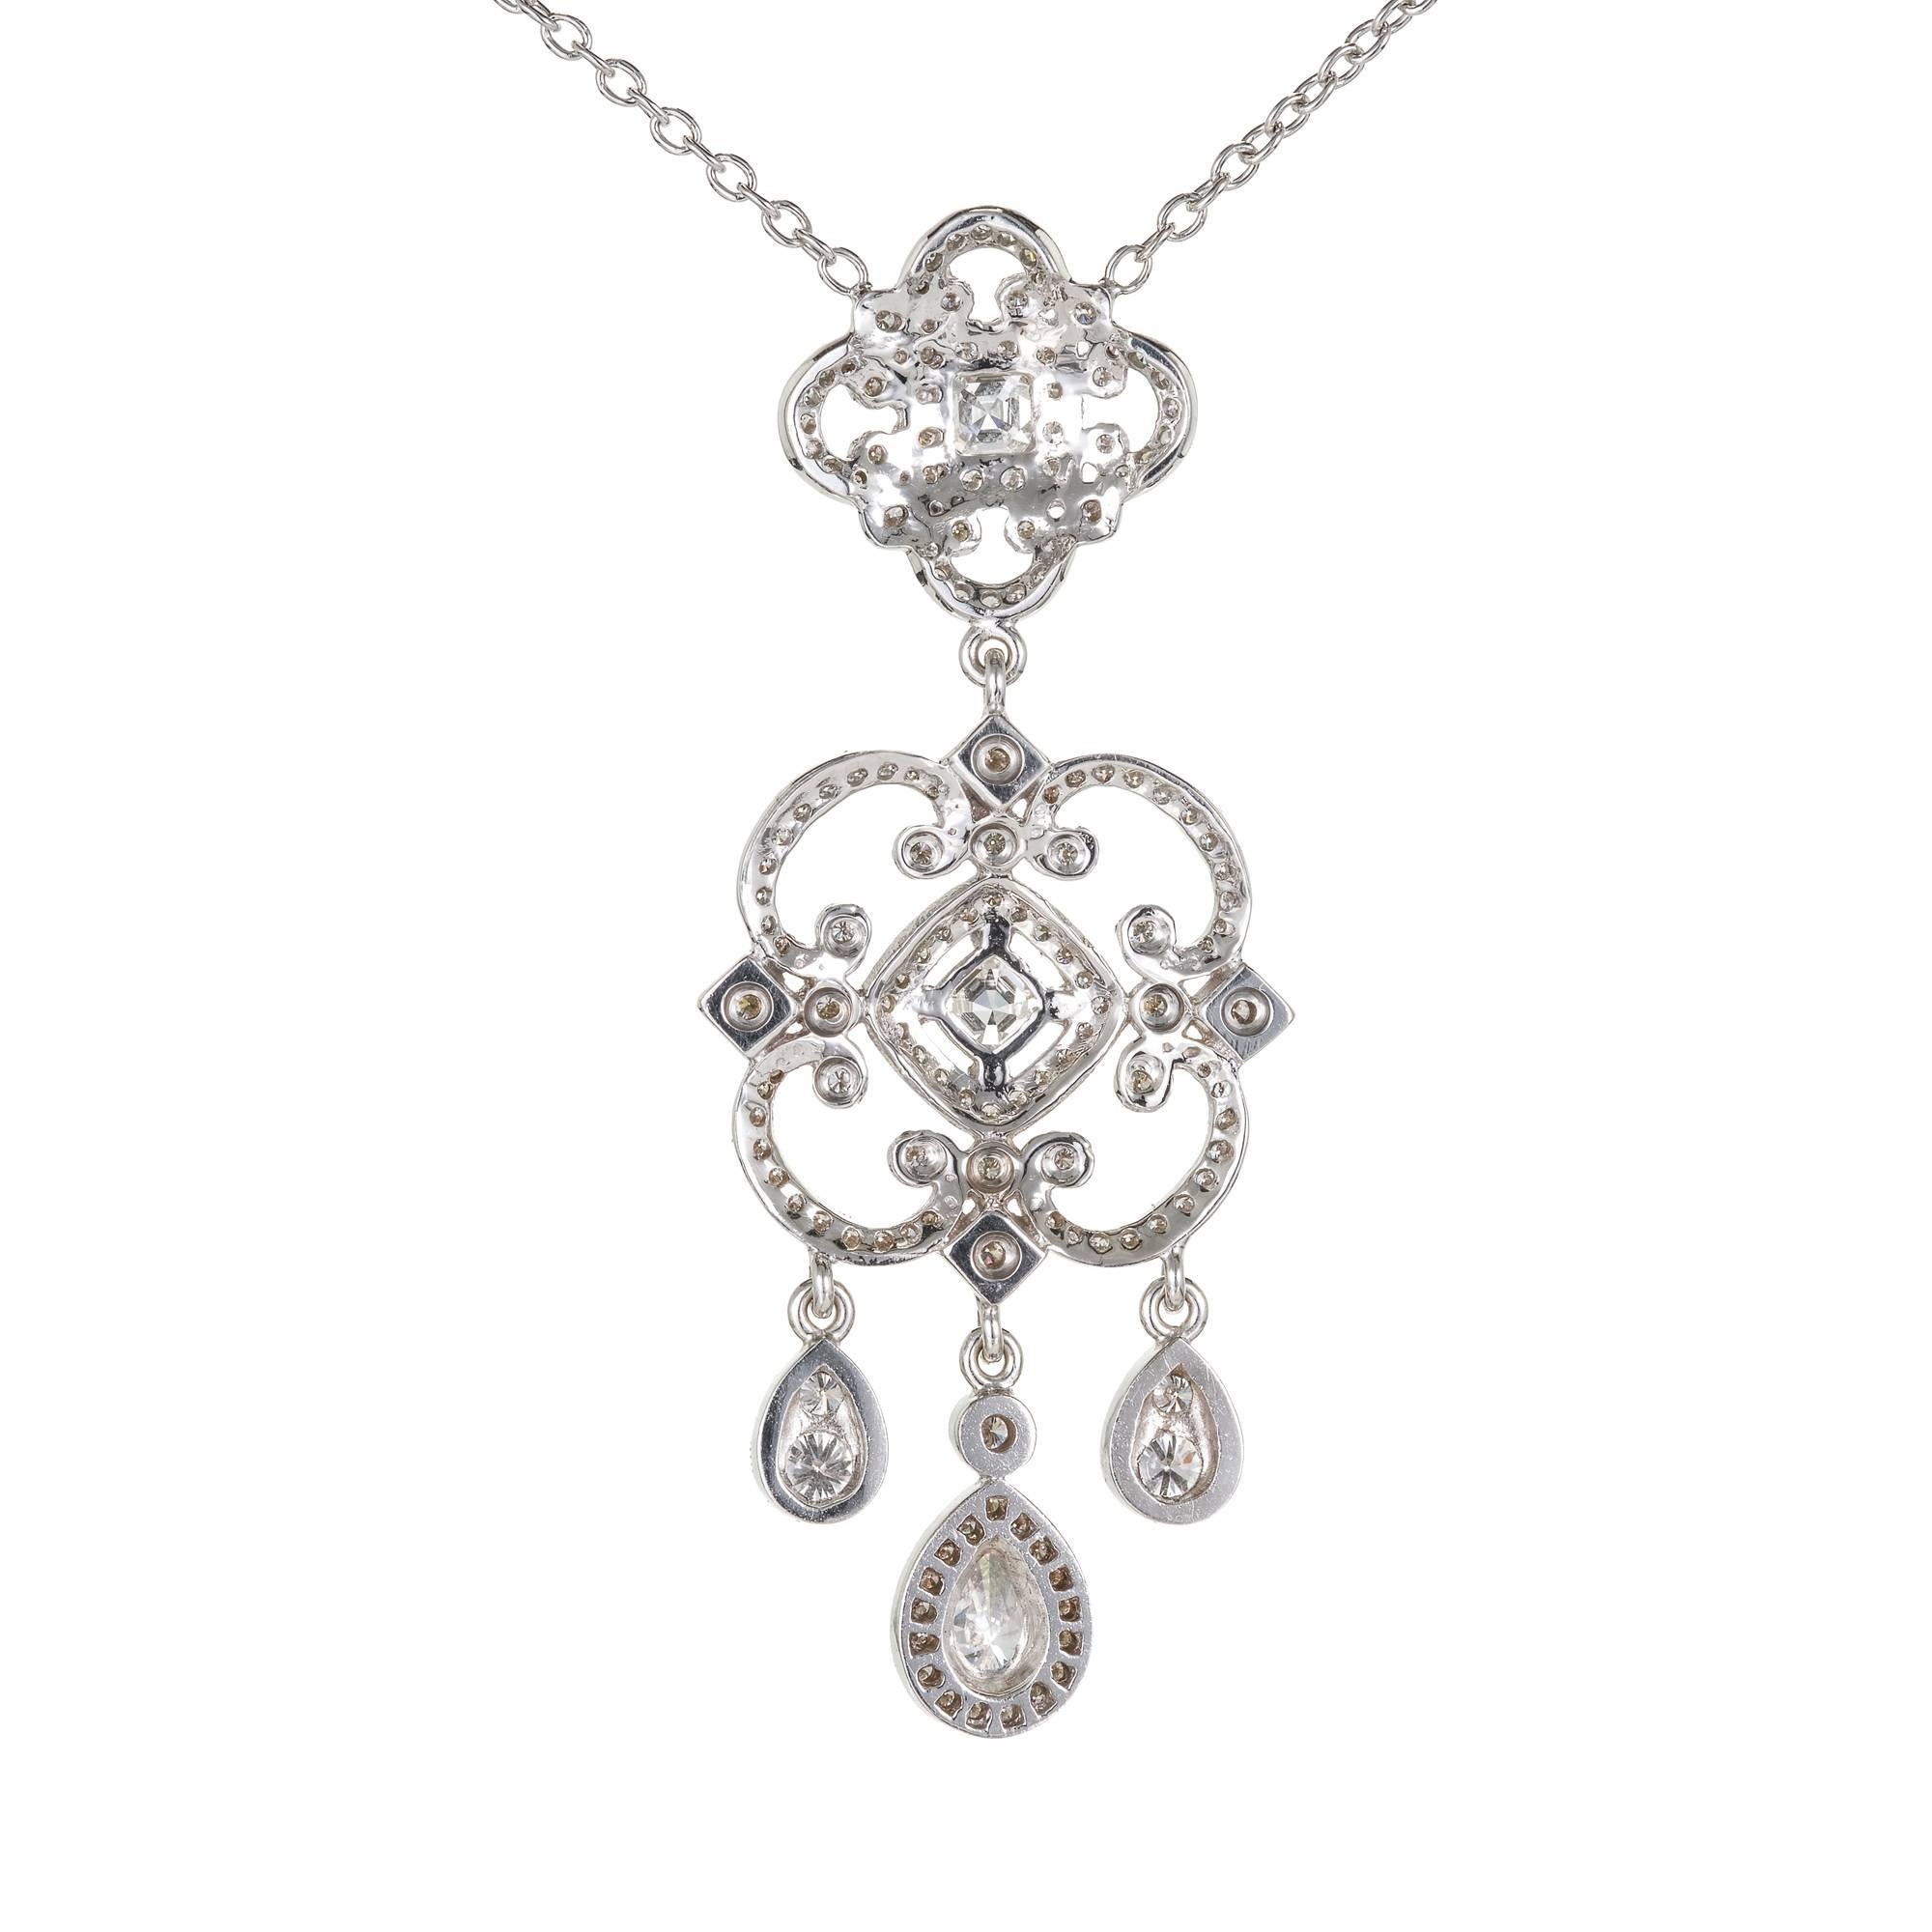 Penny Preville Chandelier style diamond pendant necklace. 18k white gold with a “Diamond by the Yard” style chain.

2 square cut diamonds, approx. total weight .30cts, G, SI1, 3.32 x 3.31mm
1 pear diamond, approx. total weight .25cts, G, SI1, 5.67 x